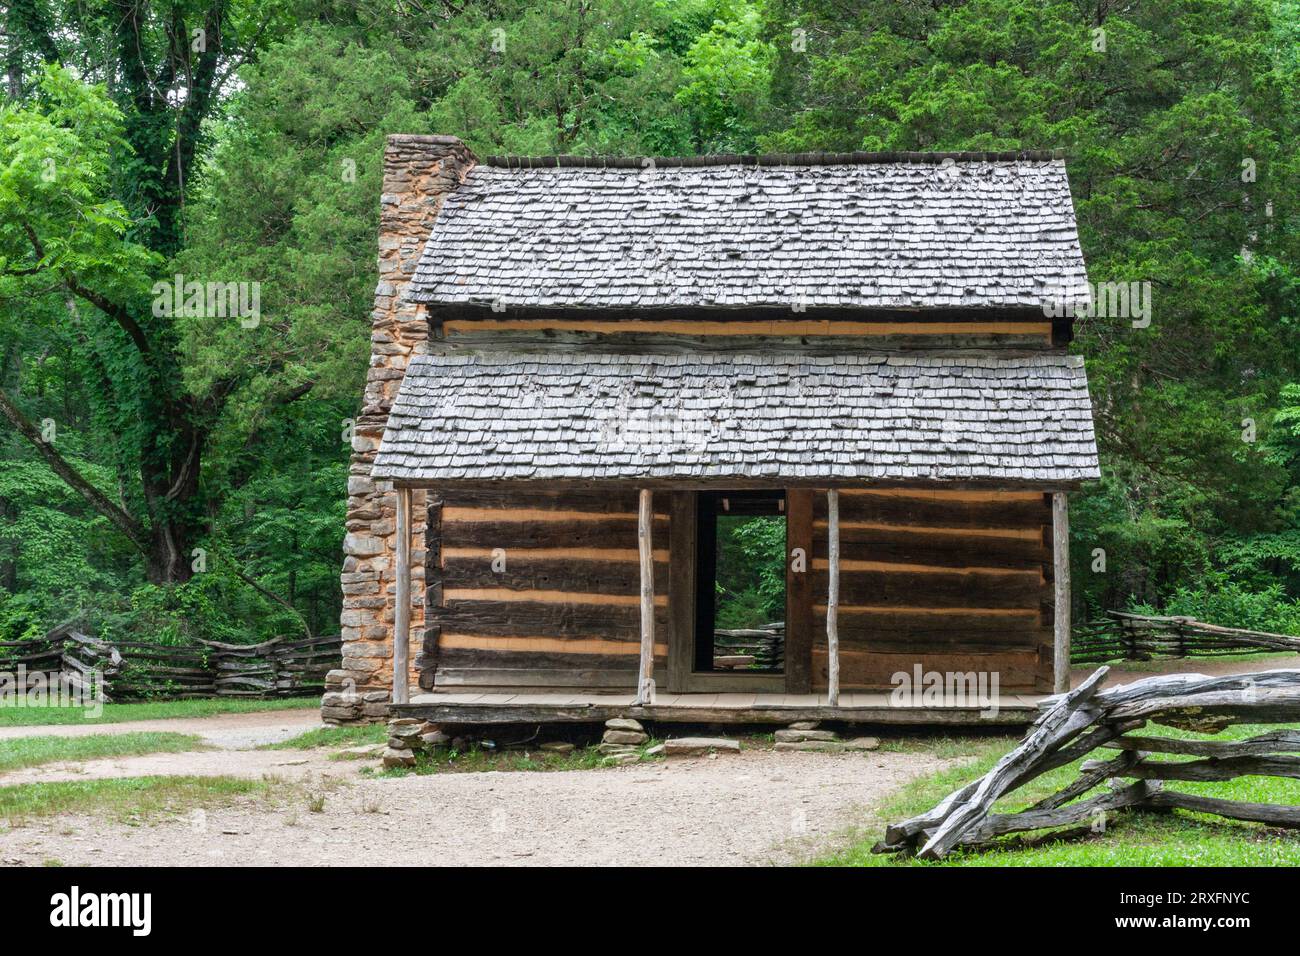 John Oliver Cabin historic site in Cades Cove village in the Great Smoky Mountain National Park in Tennessee. Stock Photo